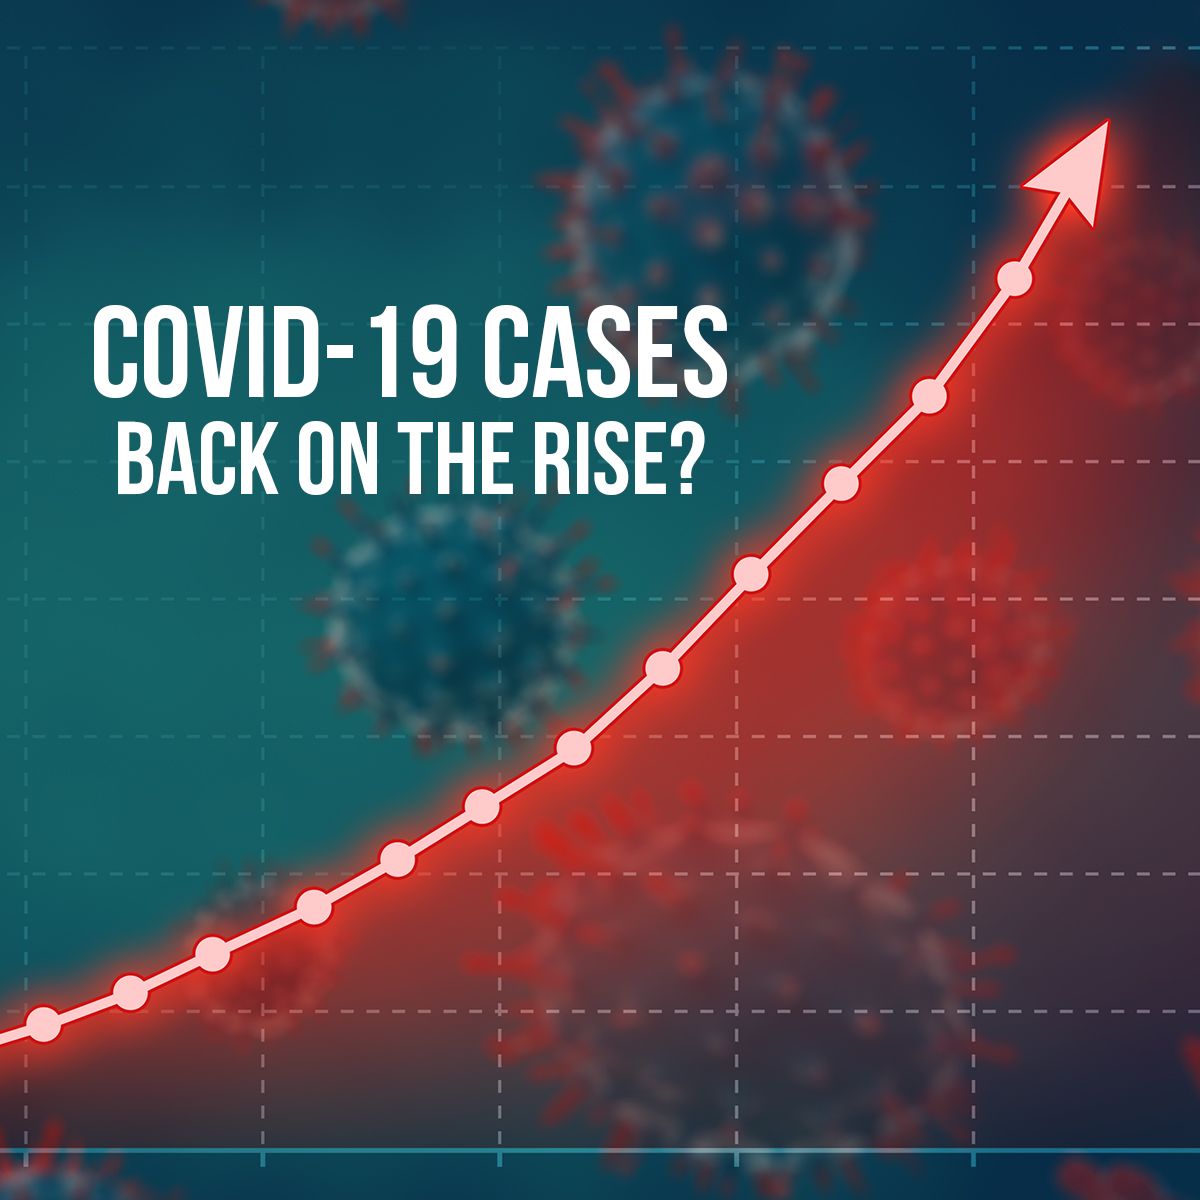 COVID-19 cases back on the rise?